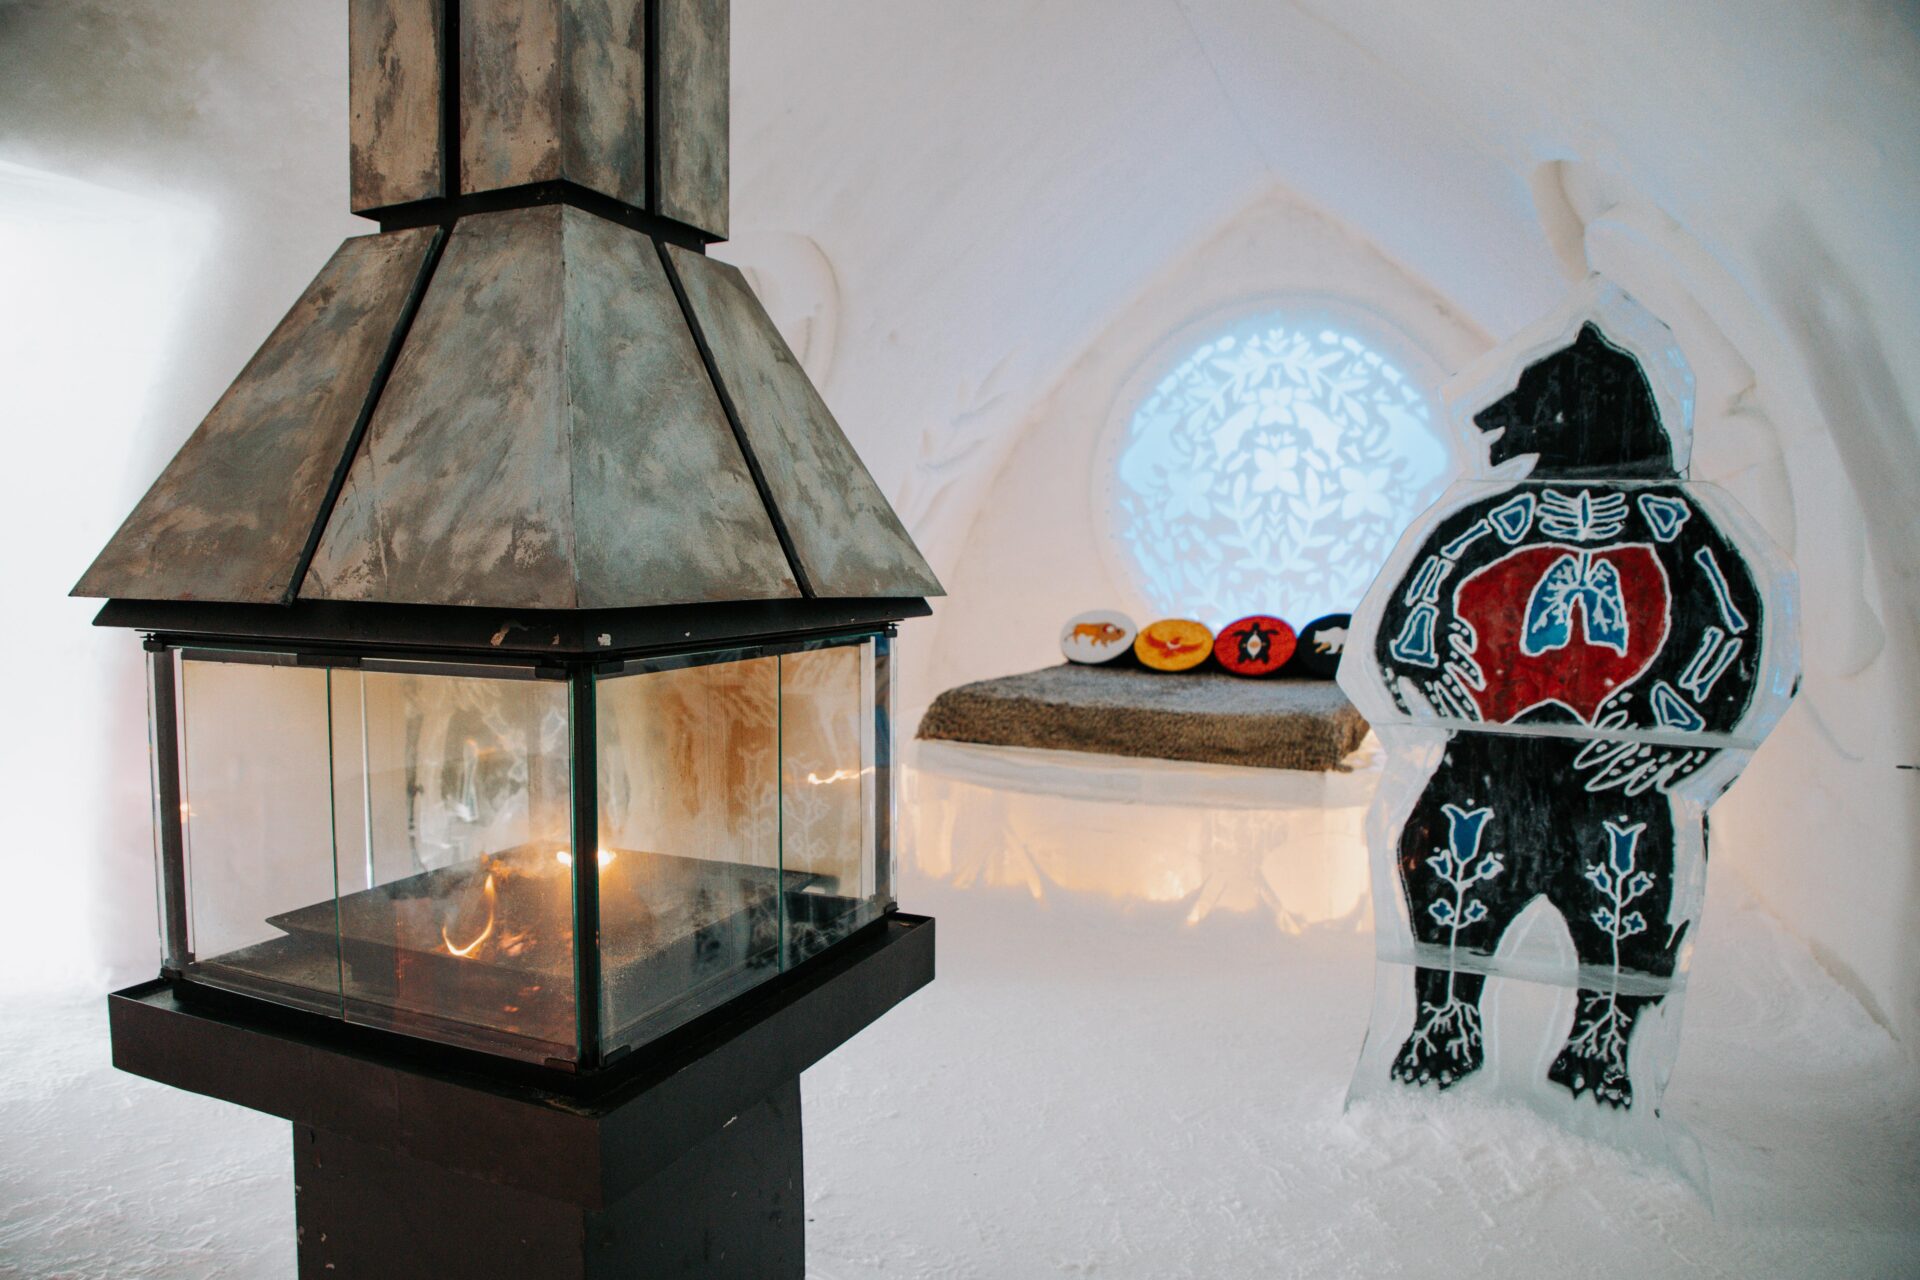 inside a themed room with bear ice sculpture and fireplace at the Hôtel de Glace